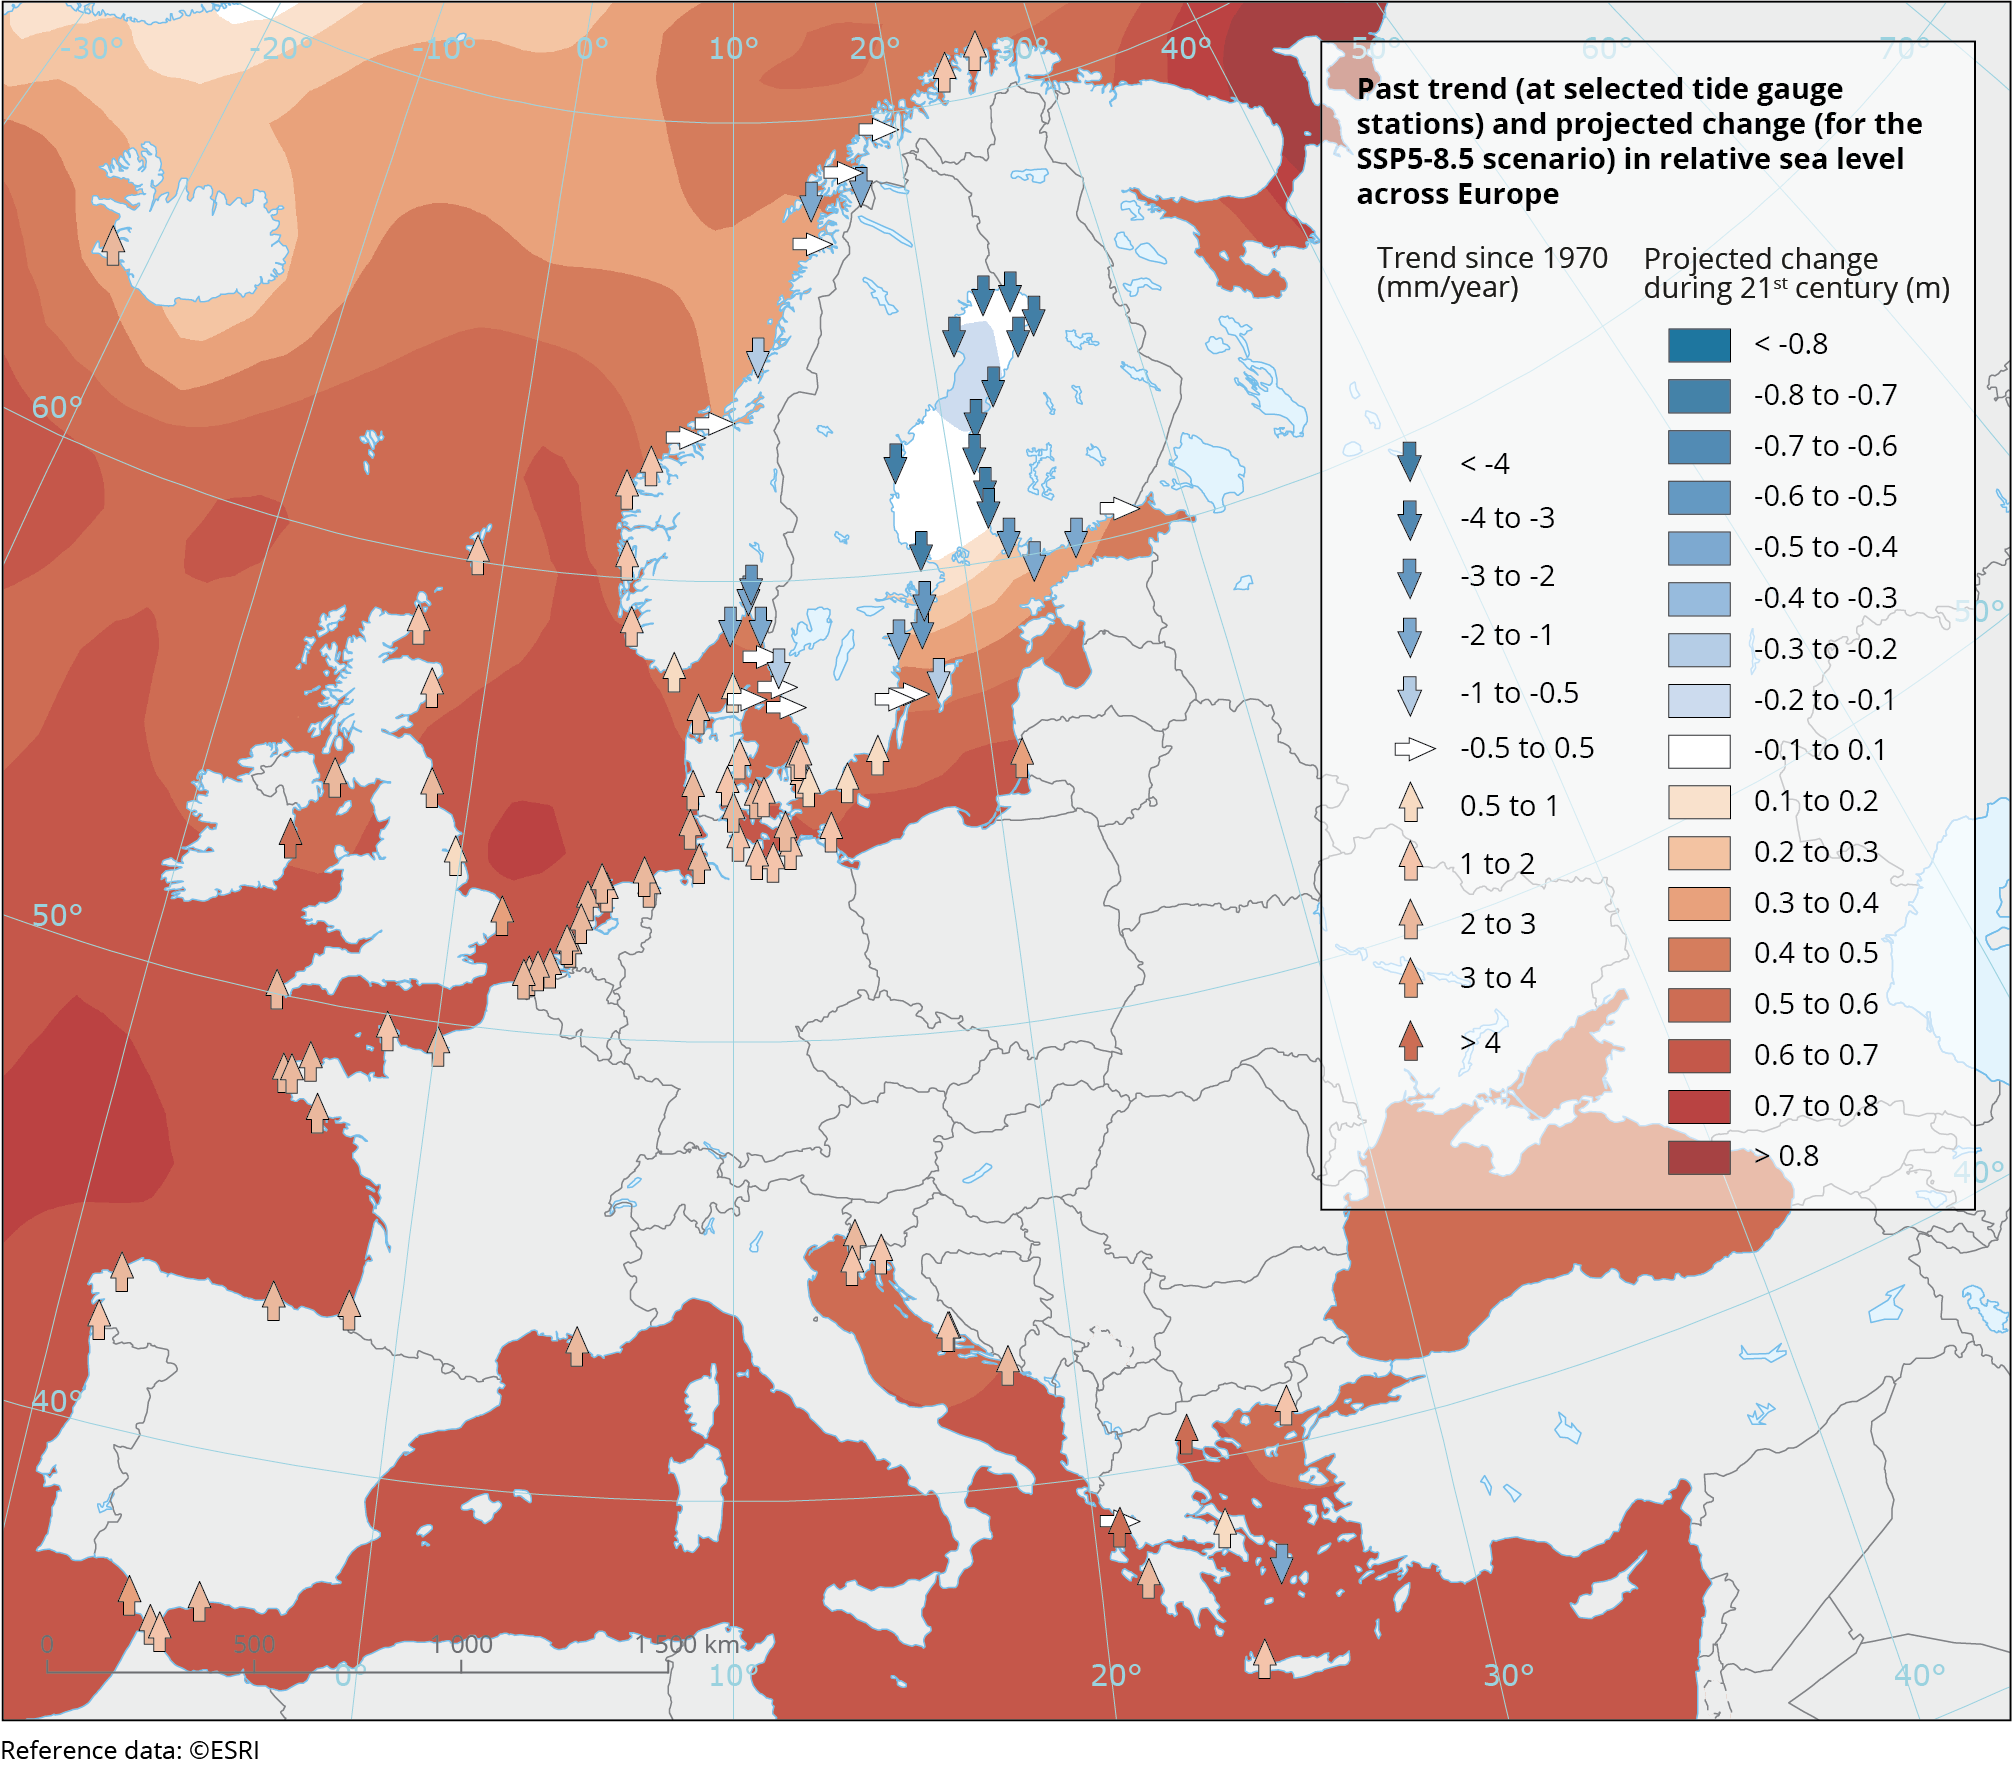 Past trends and projected changes in relative sea level across Europe